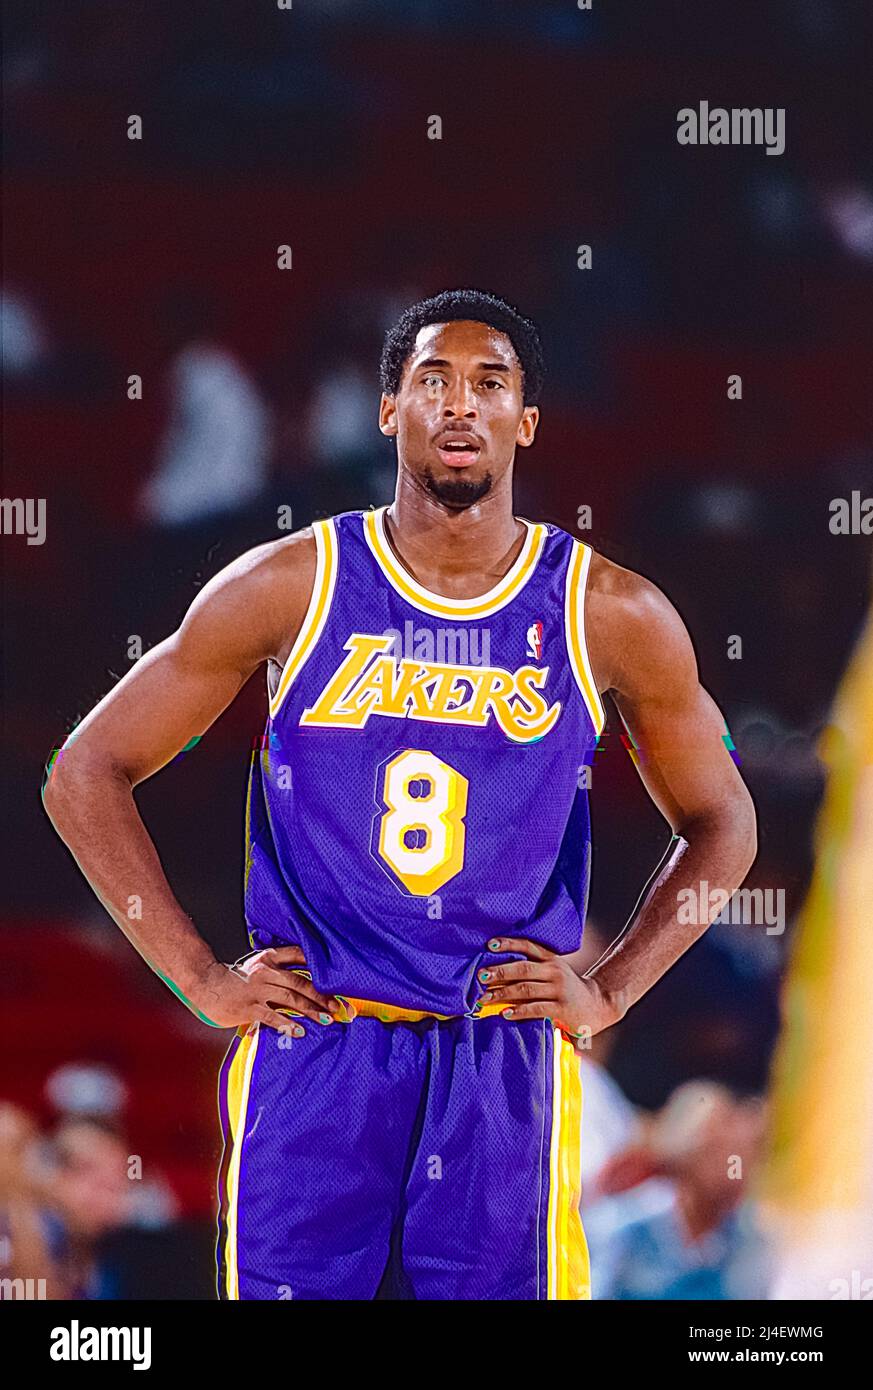 Kobe Bryant competing for the Los Angeles Lakers during his rookie season in a game against the Denver Nuggets in 1997 Stock Photo